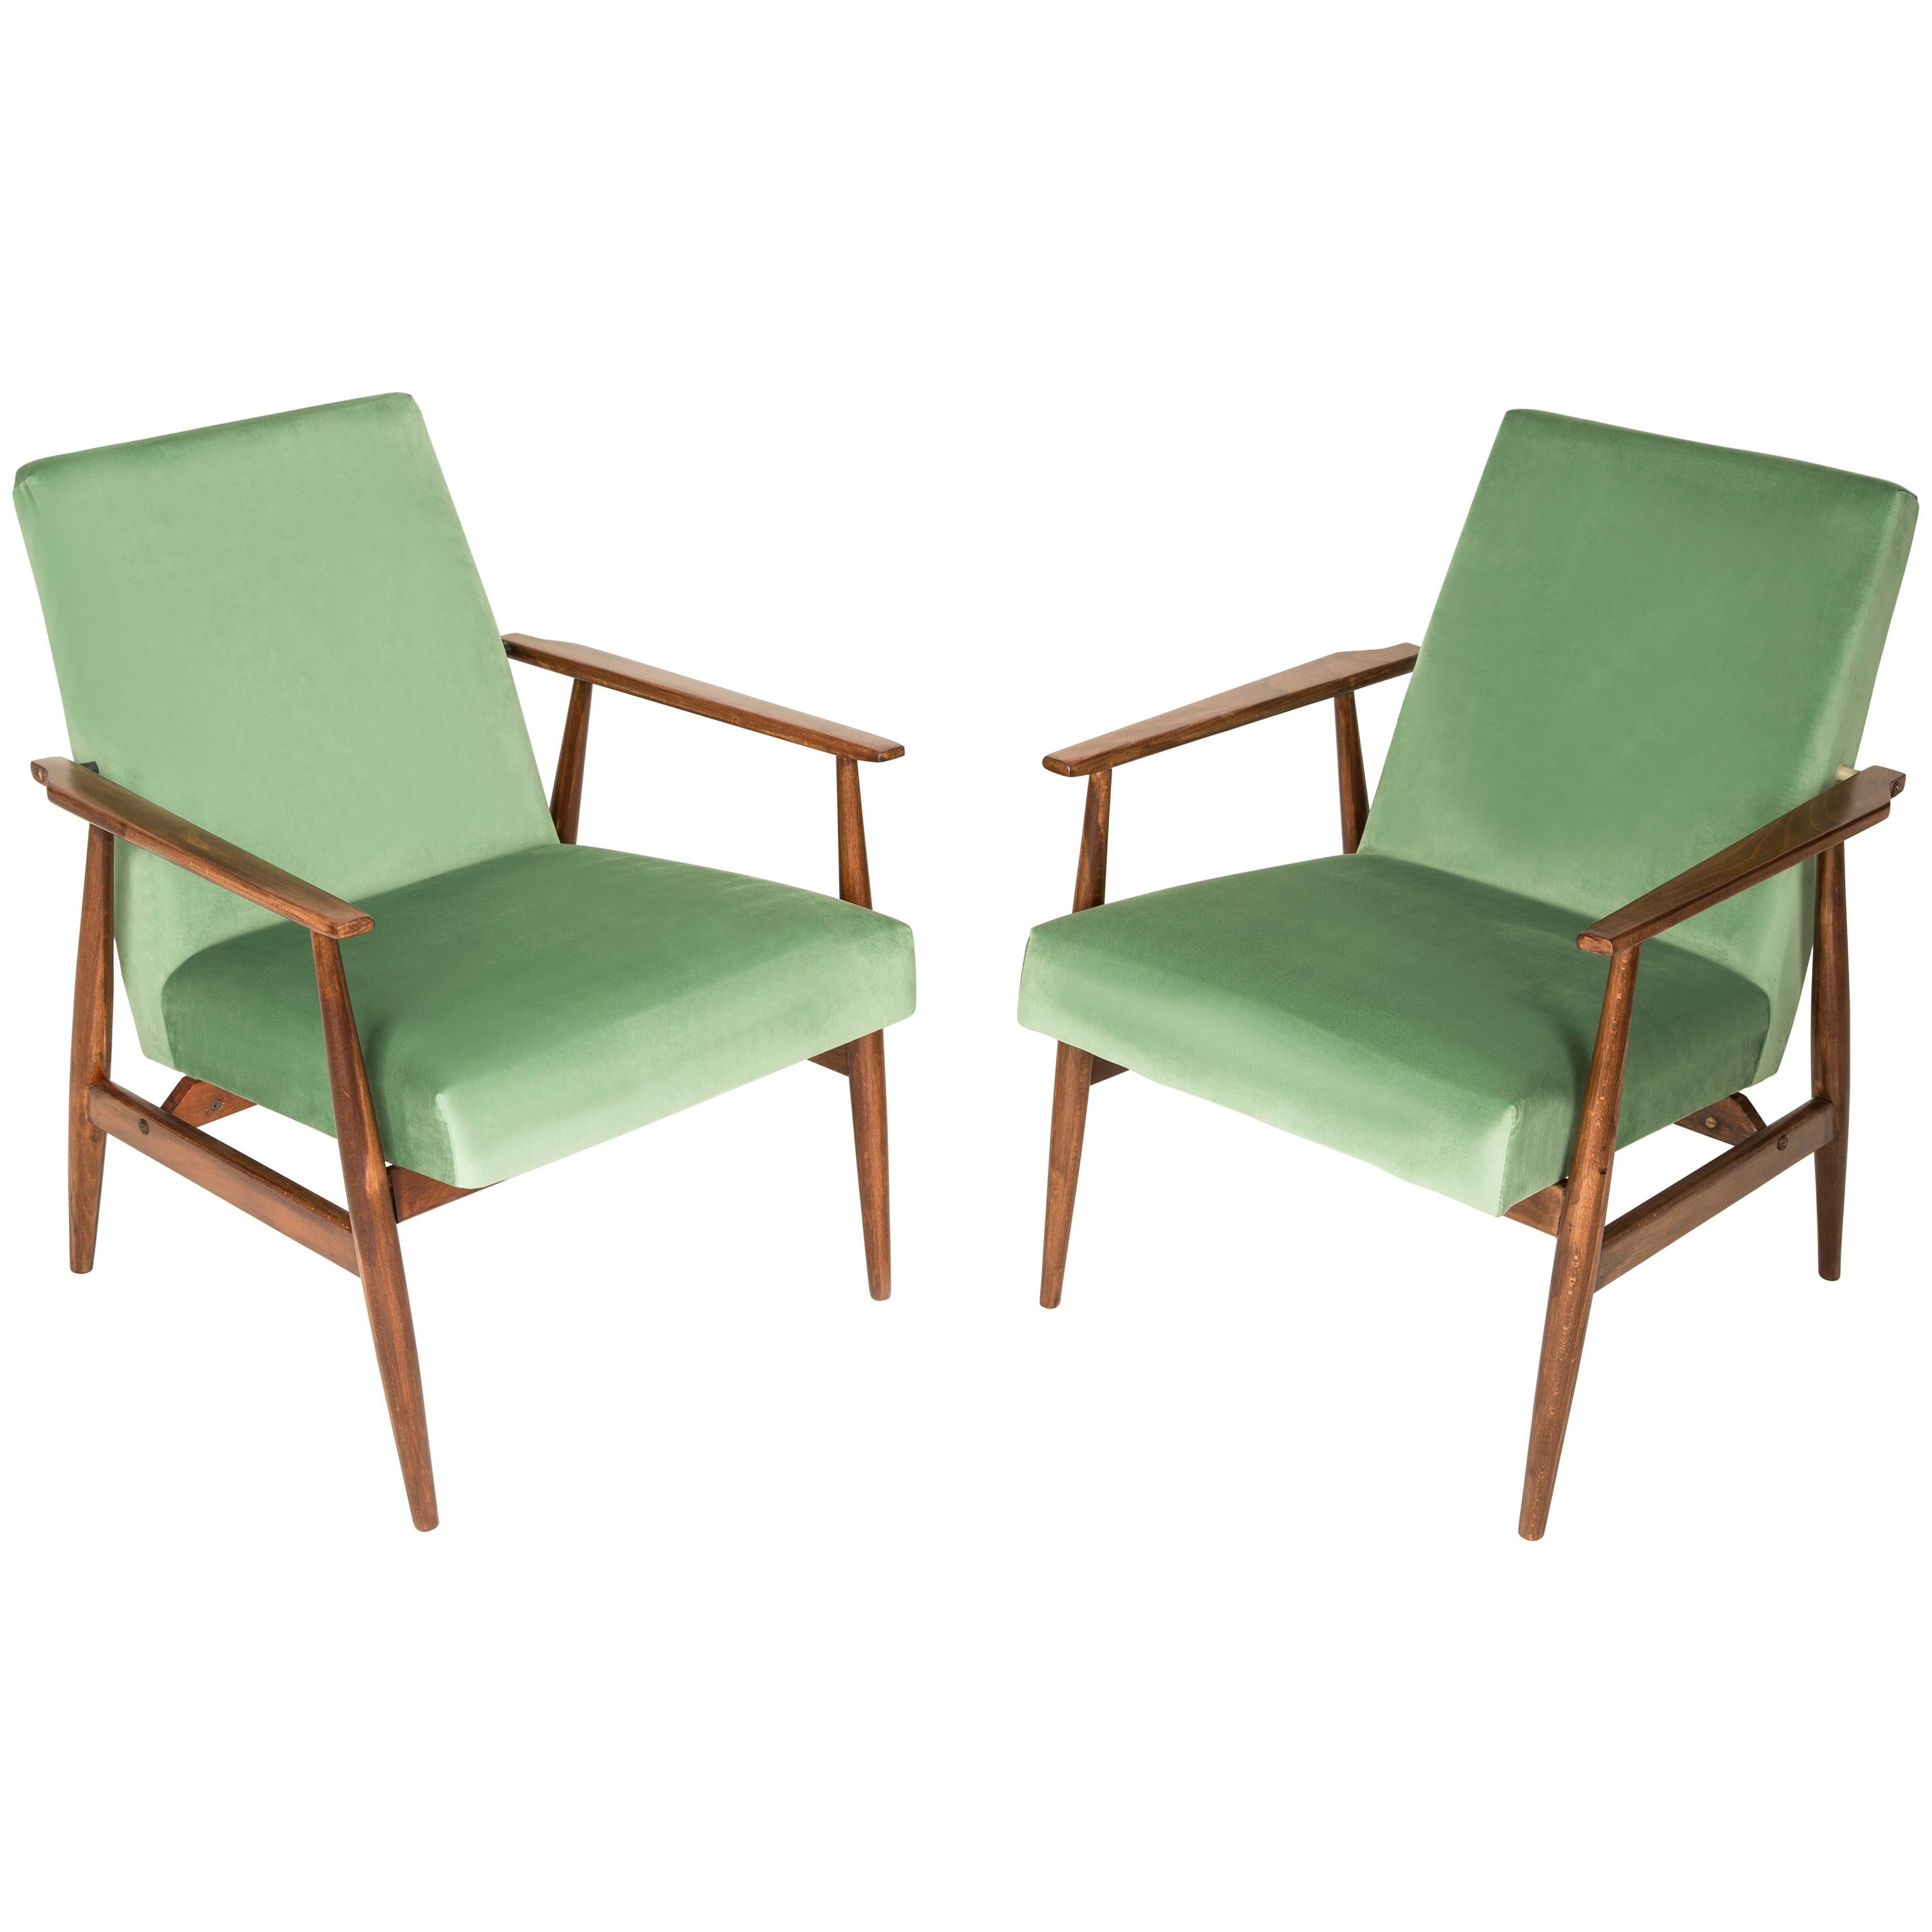 20th Century Pair of Mint Green Dante Armchairs, H. Lis, 1960s For Sale